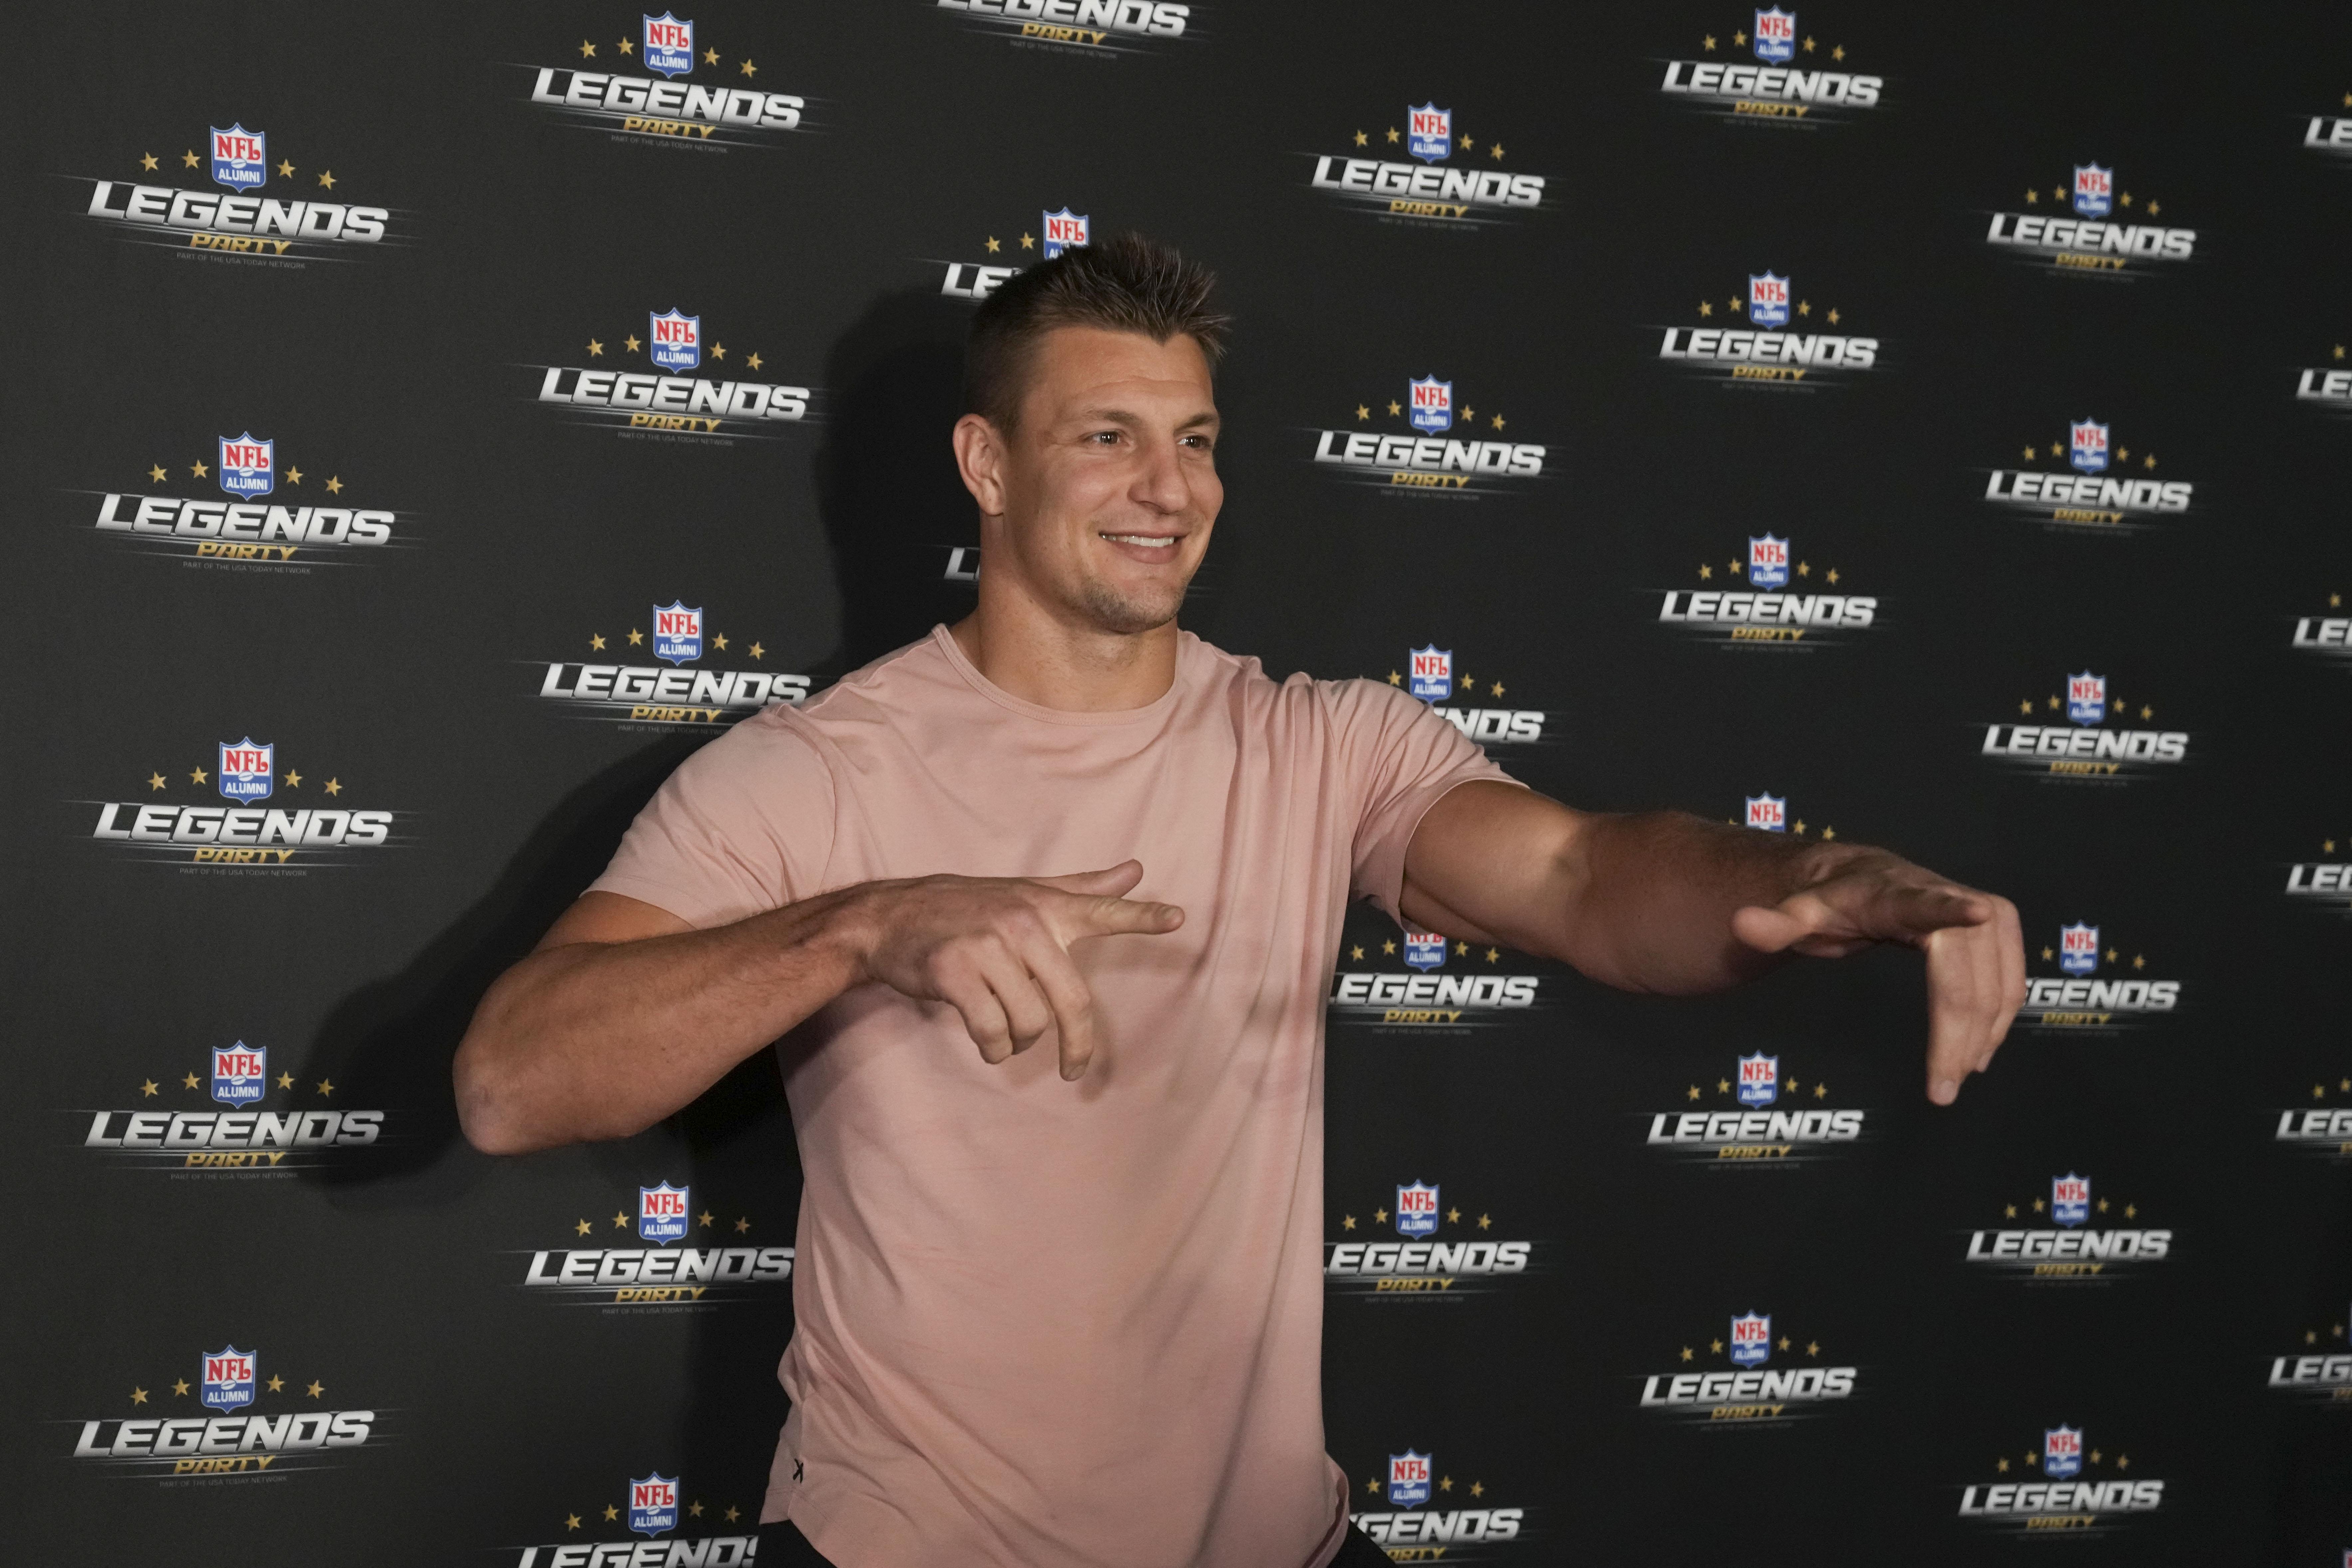 Rob Gronkowski FanDuel Commercial: Gronk to Kick $10 Million Field Goal Live During Super Bowl